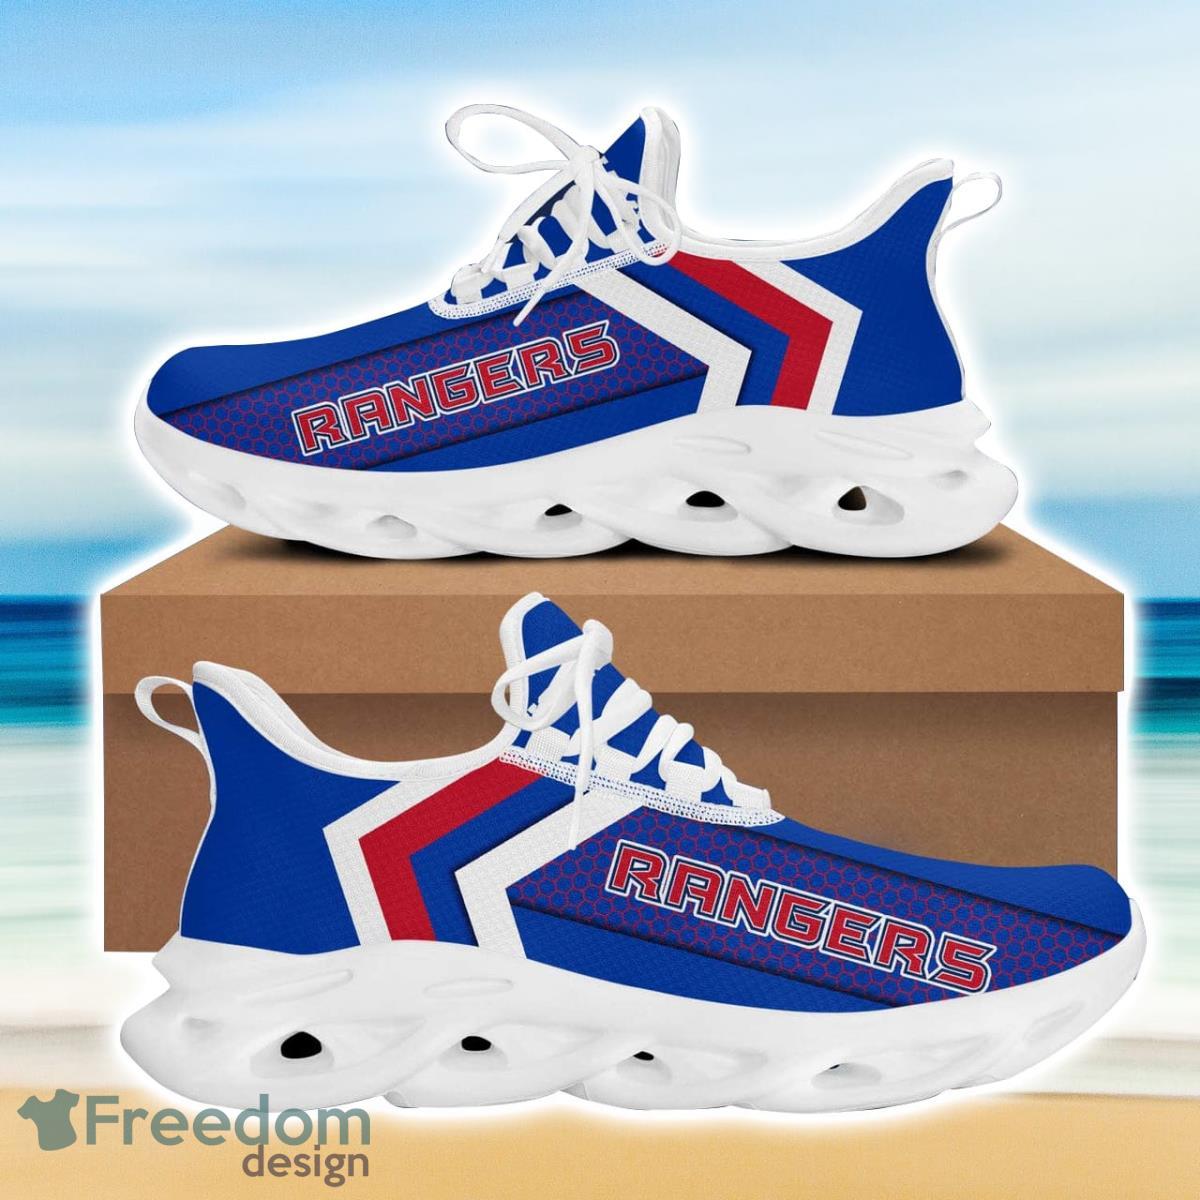 Custom Name NHL New York Rangers Personalized Name Max Soul Shoes Trending  Sport Gift Sneakers